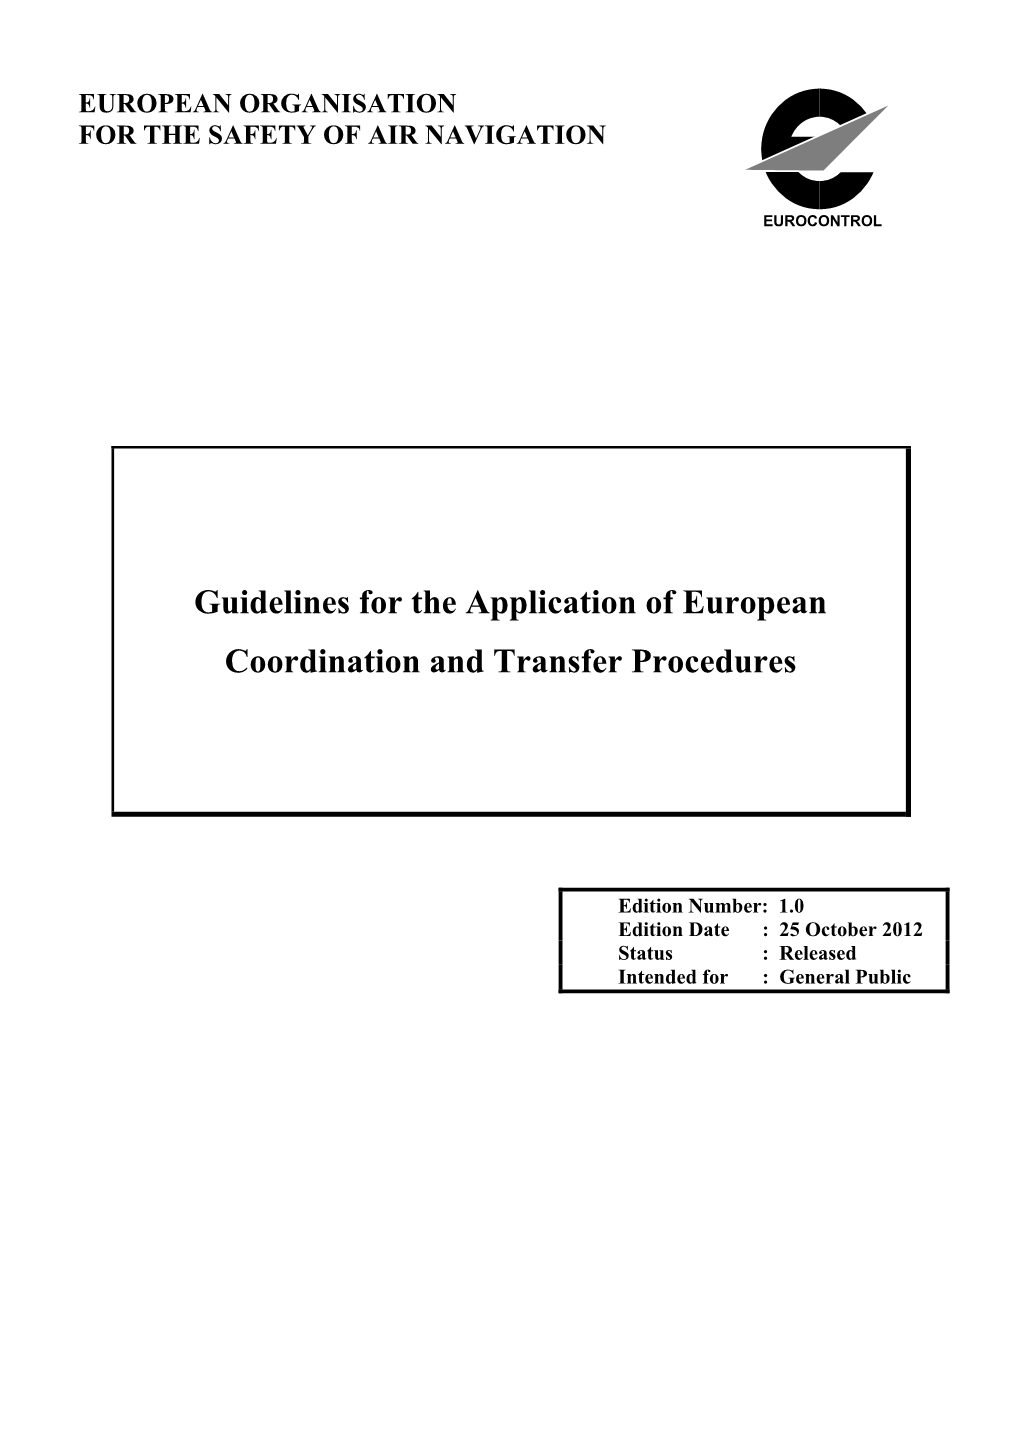 Guidelines for the Application of European Coordination and Transfer Procedures